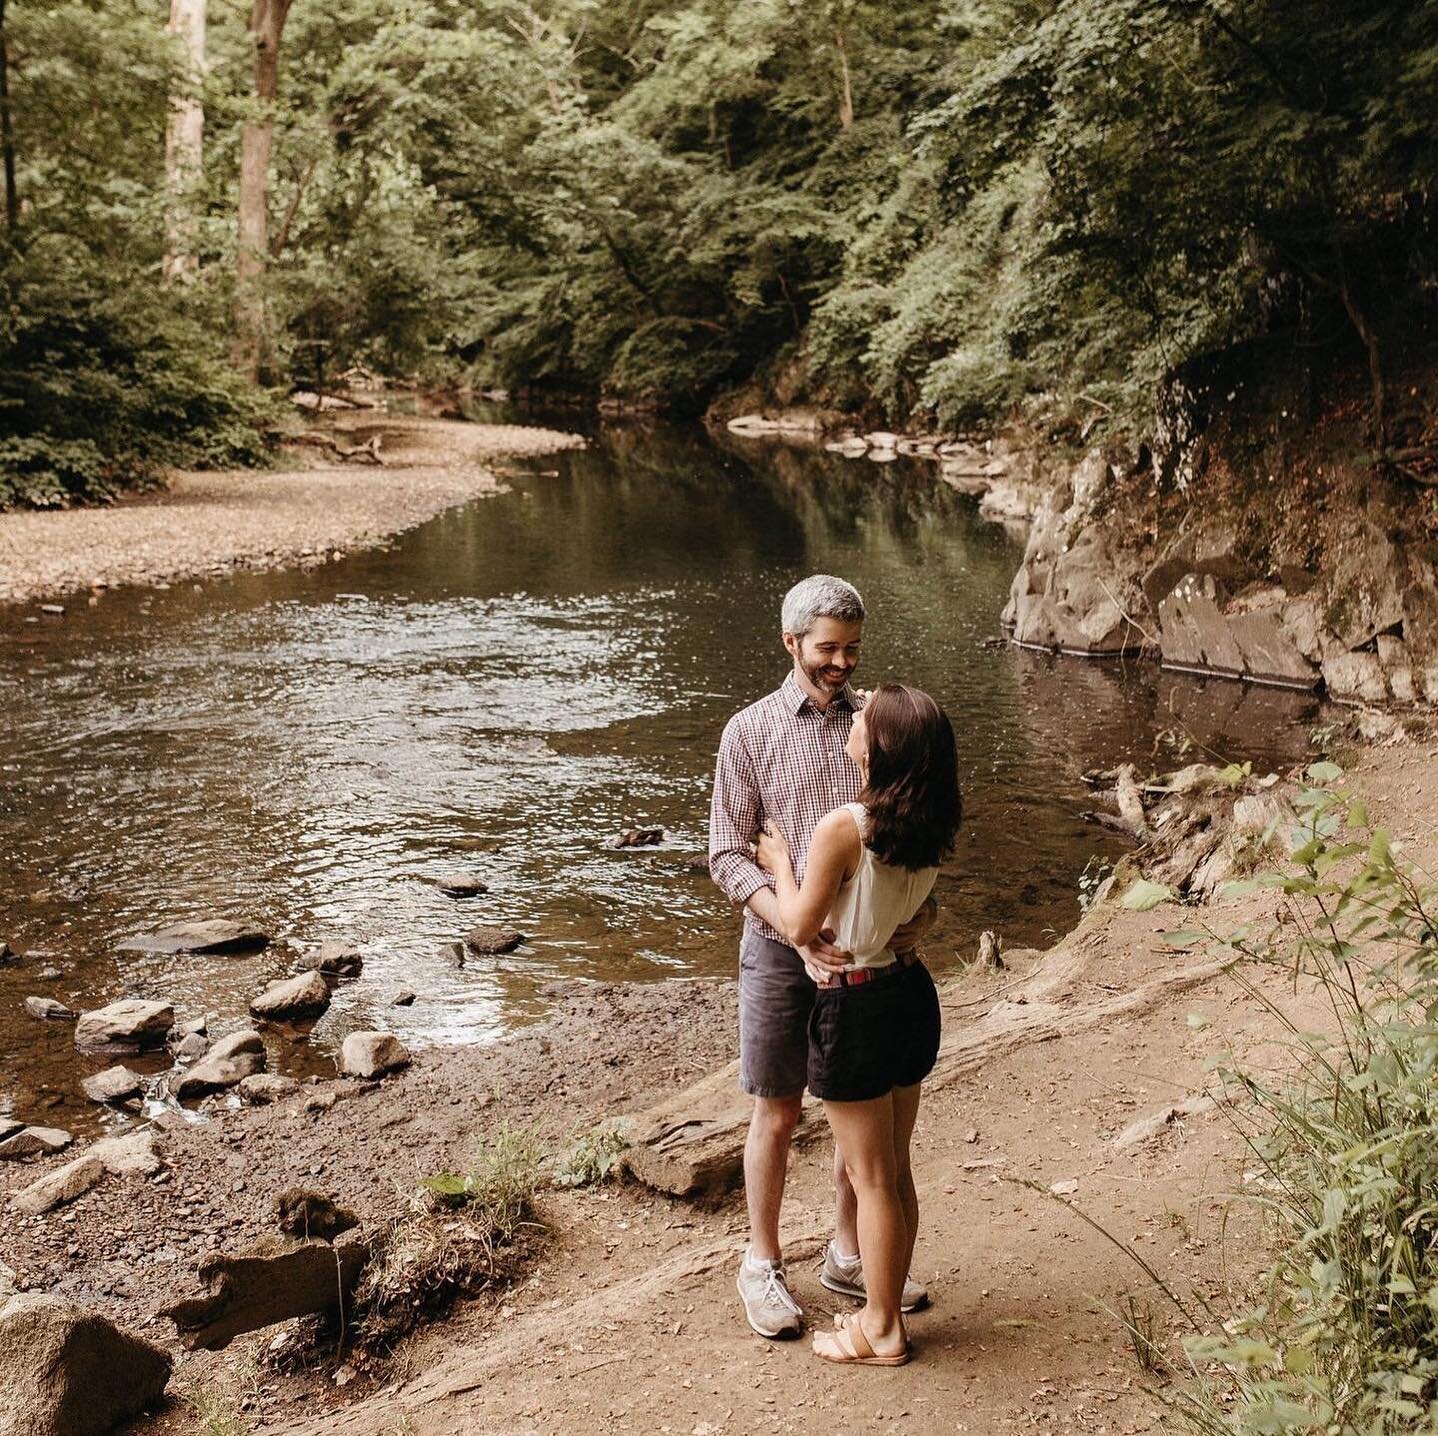 I still can&rsquo;t believe these were captured in DC. K &amp; R took me on the best adventure, to a place that I didn&rsquo;t even know existed. It was quiet, lush and just minutes away from the Washington monuments. Crazy to think that these two do